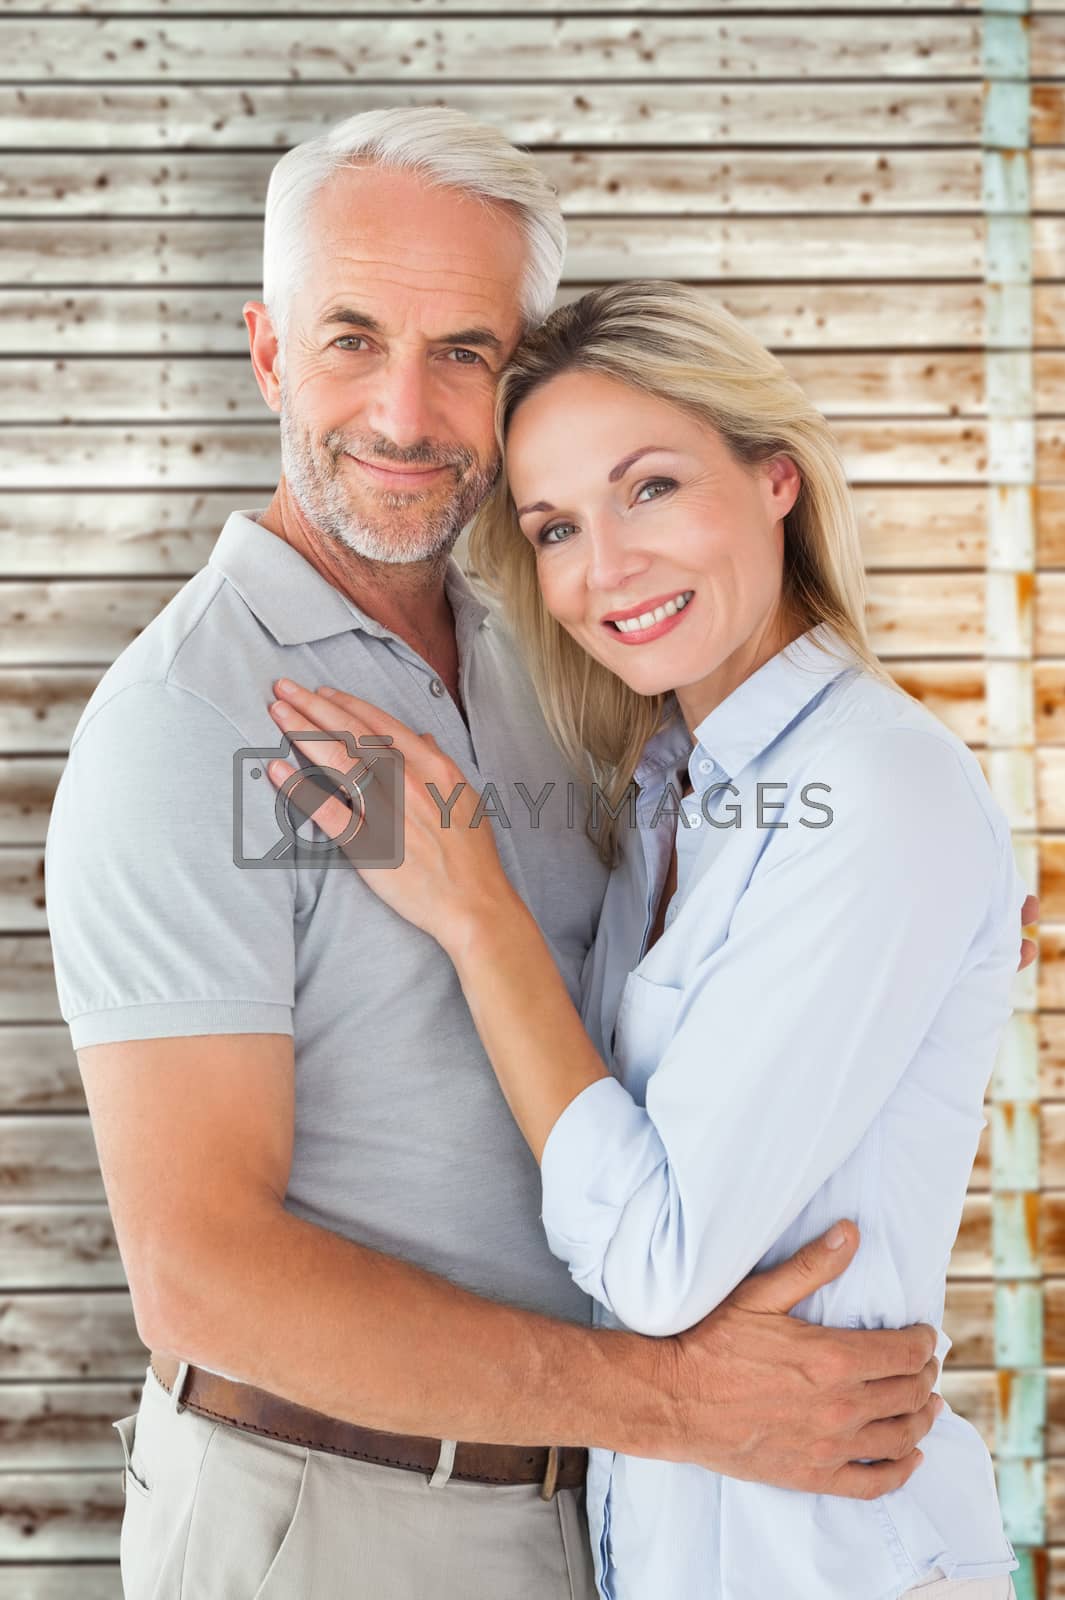 Royalty free image of Composite image of happy couple standing and smiling at camera by Wavebreakmedia